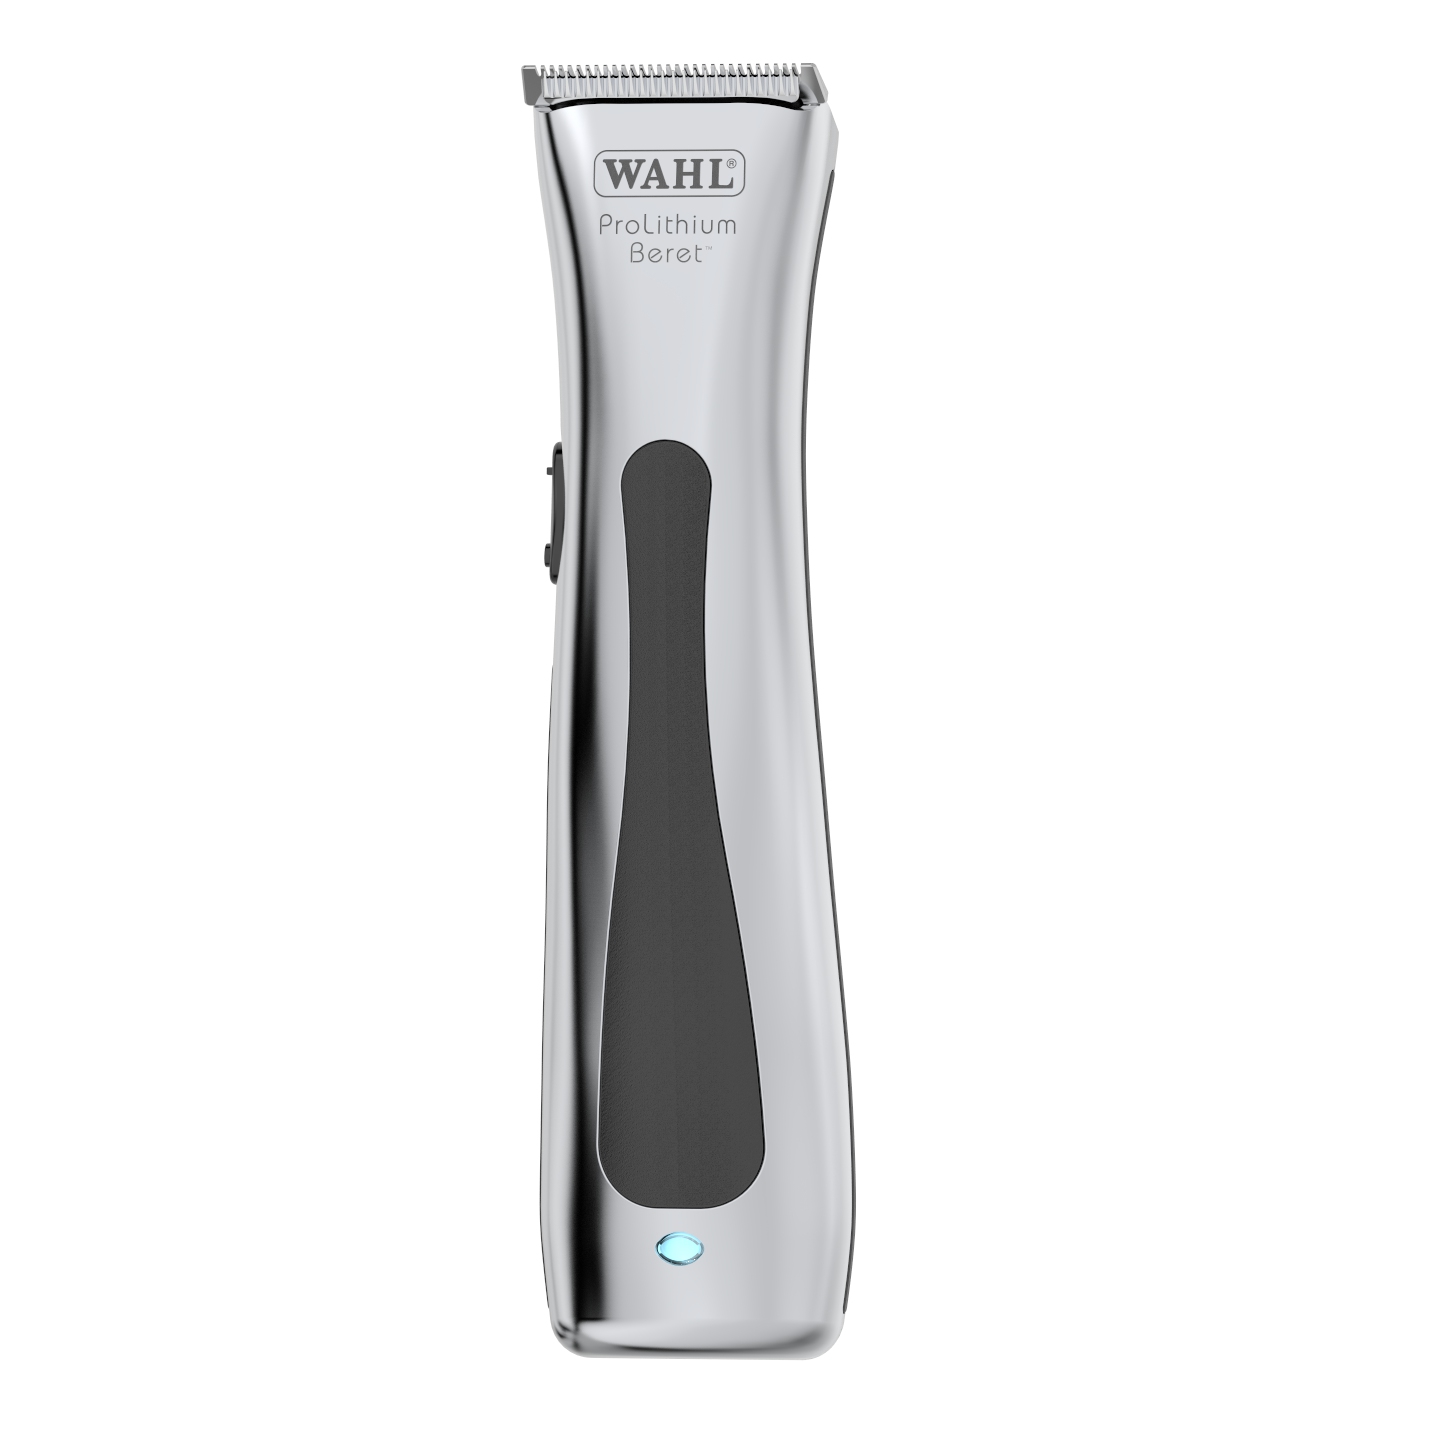 wahl lithium ion replacement parts